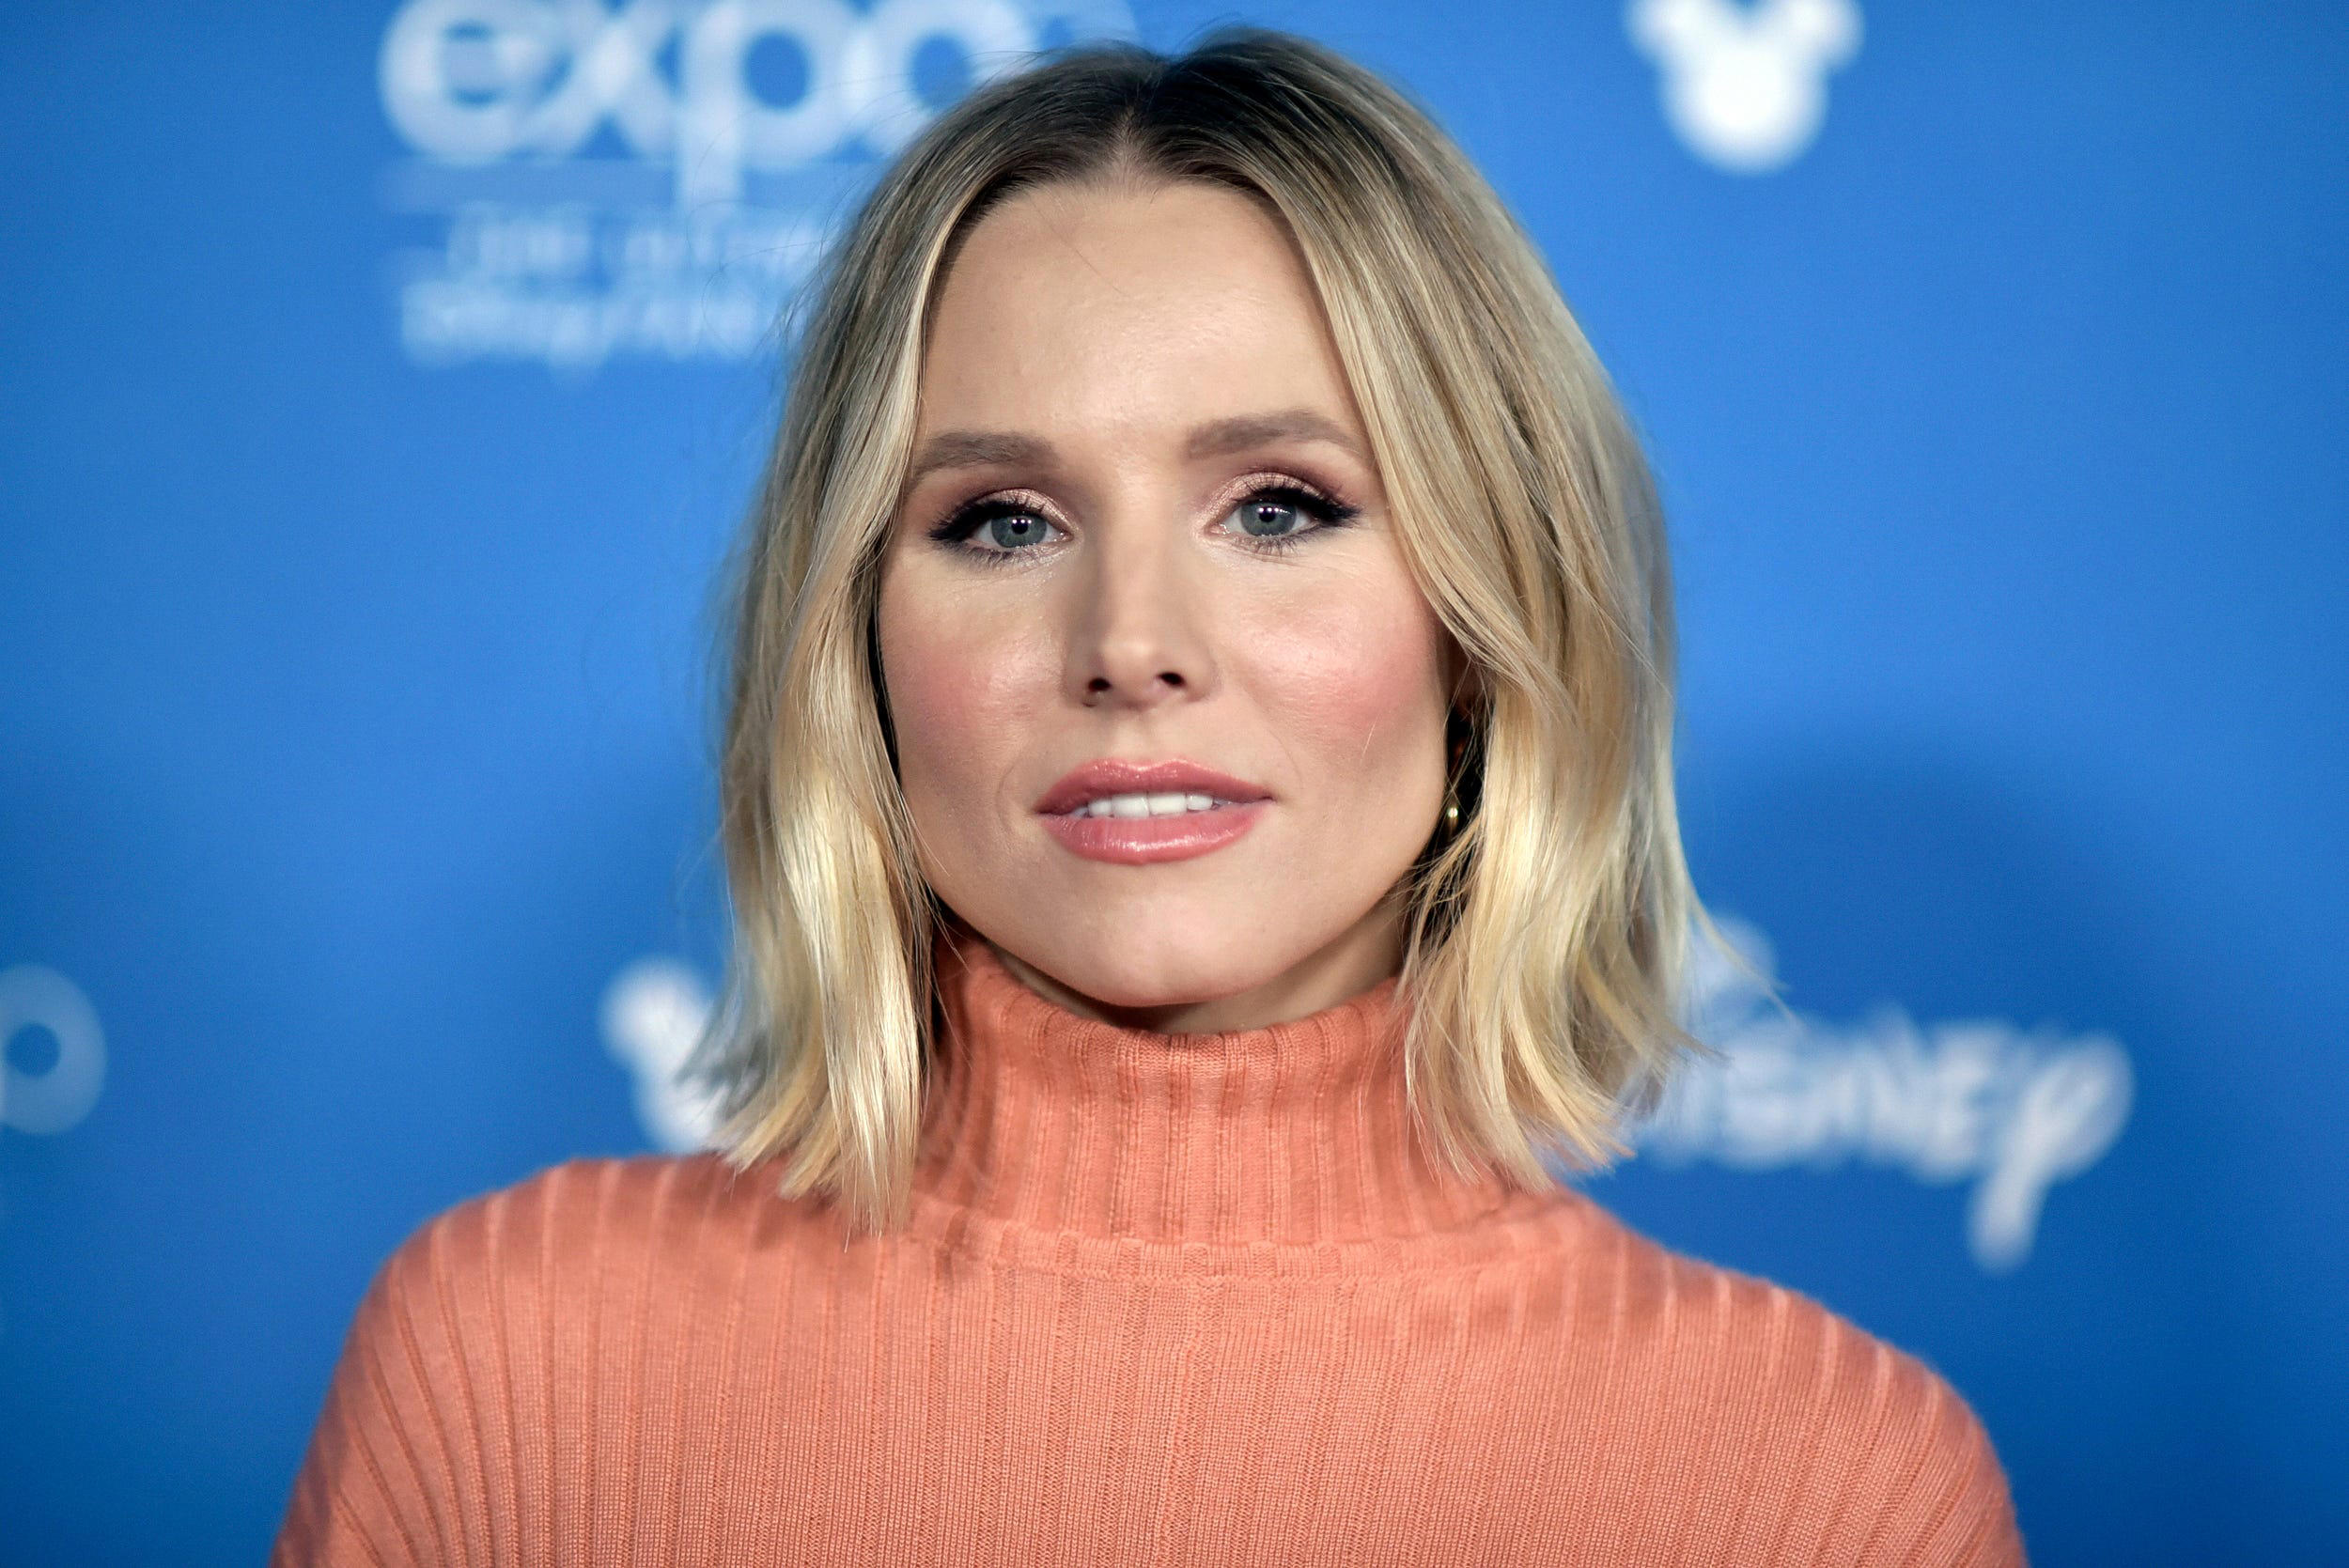 Kristen Bell Reveals Her Daughters Drink Nonalcoholic Beer Judge Me If You Want